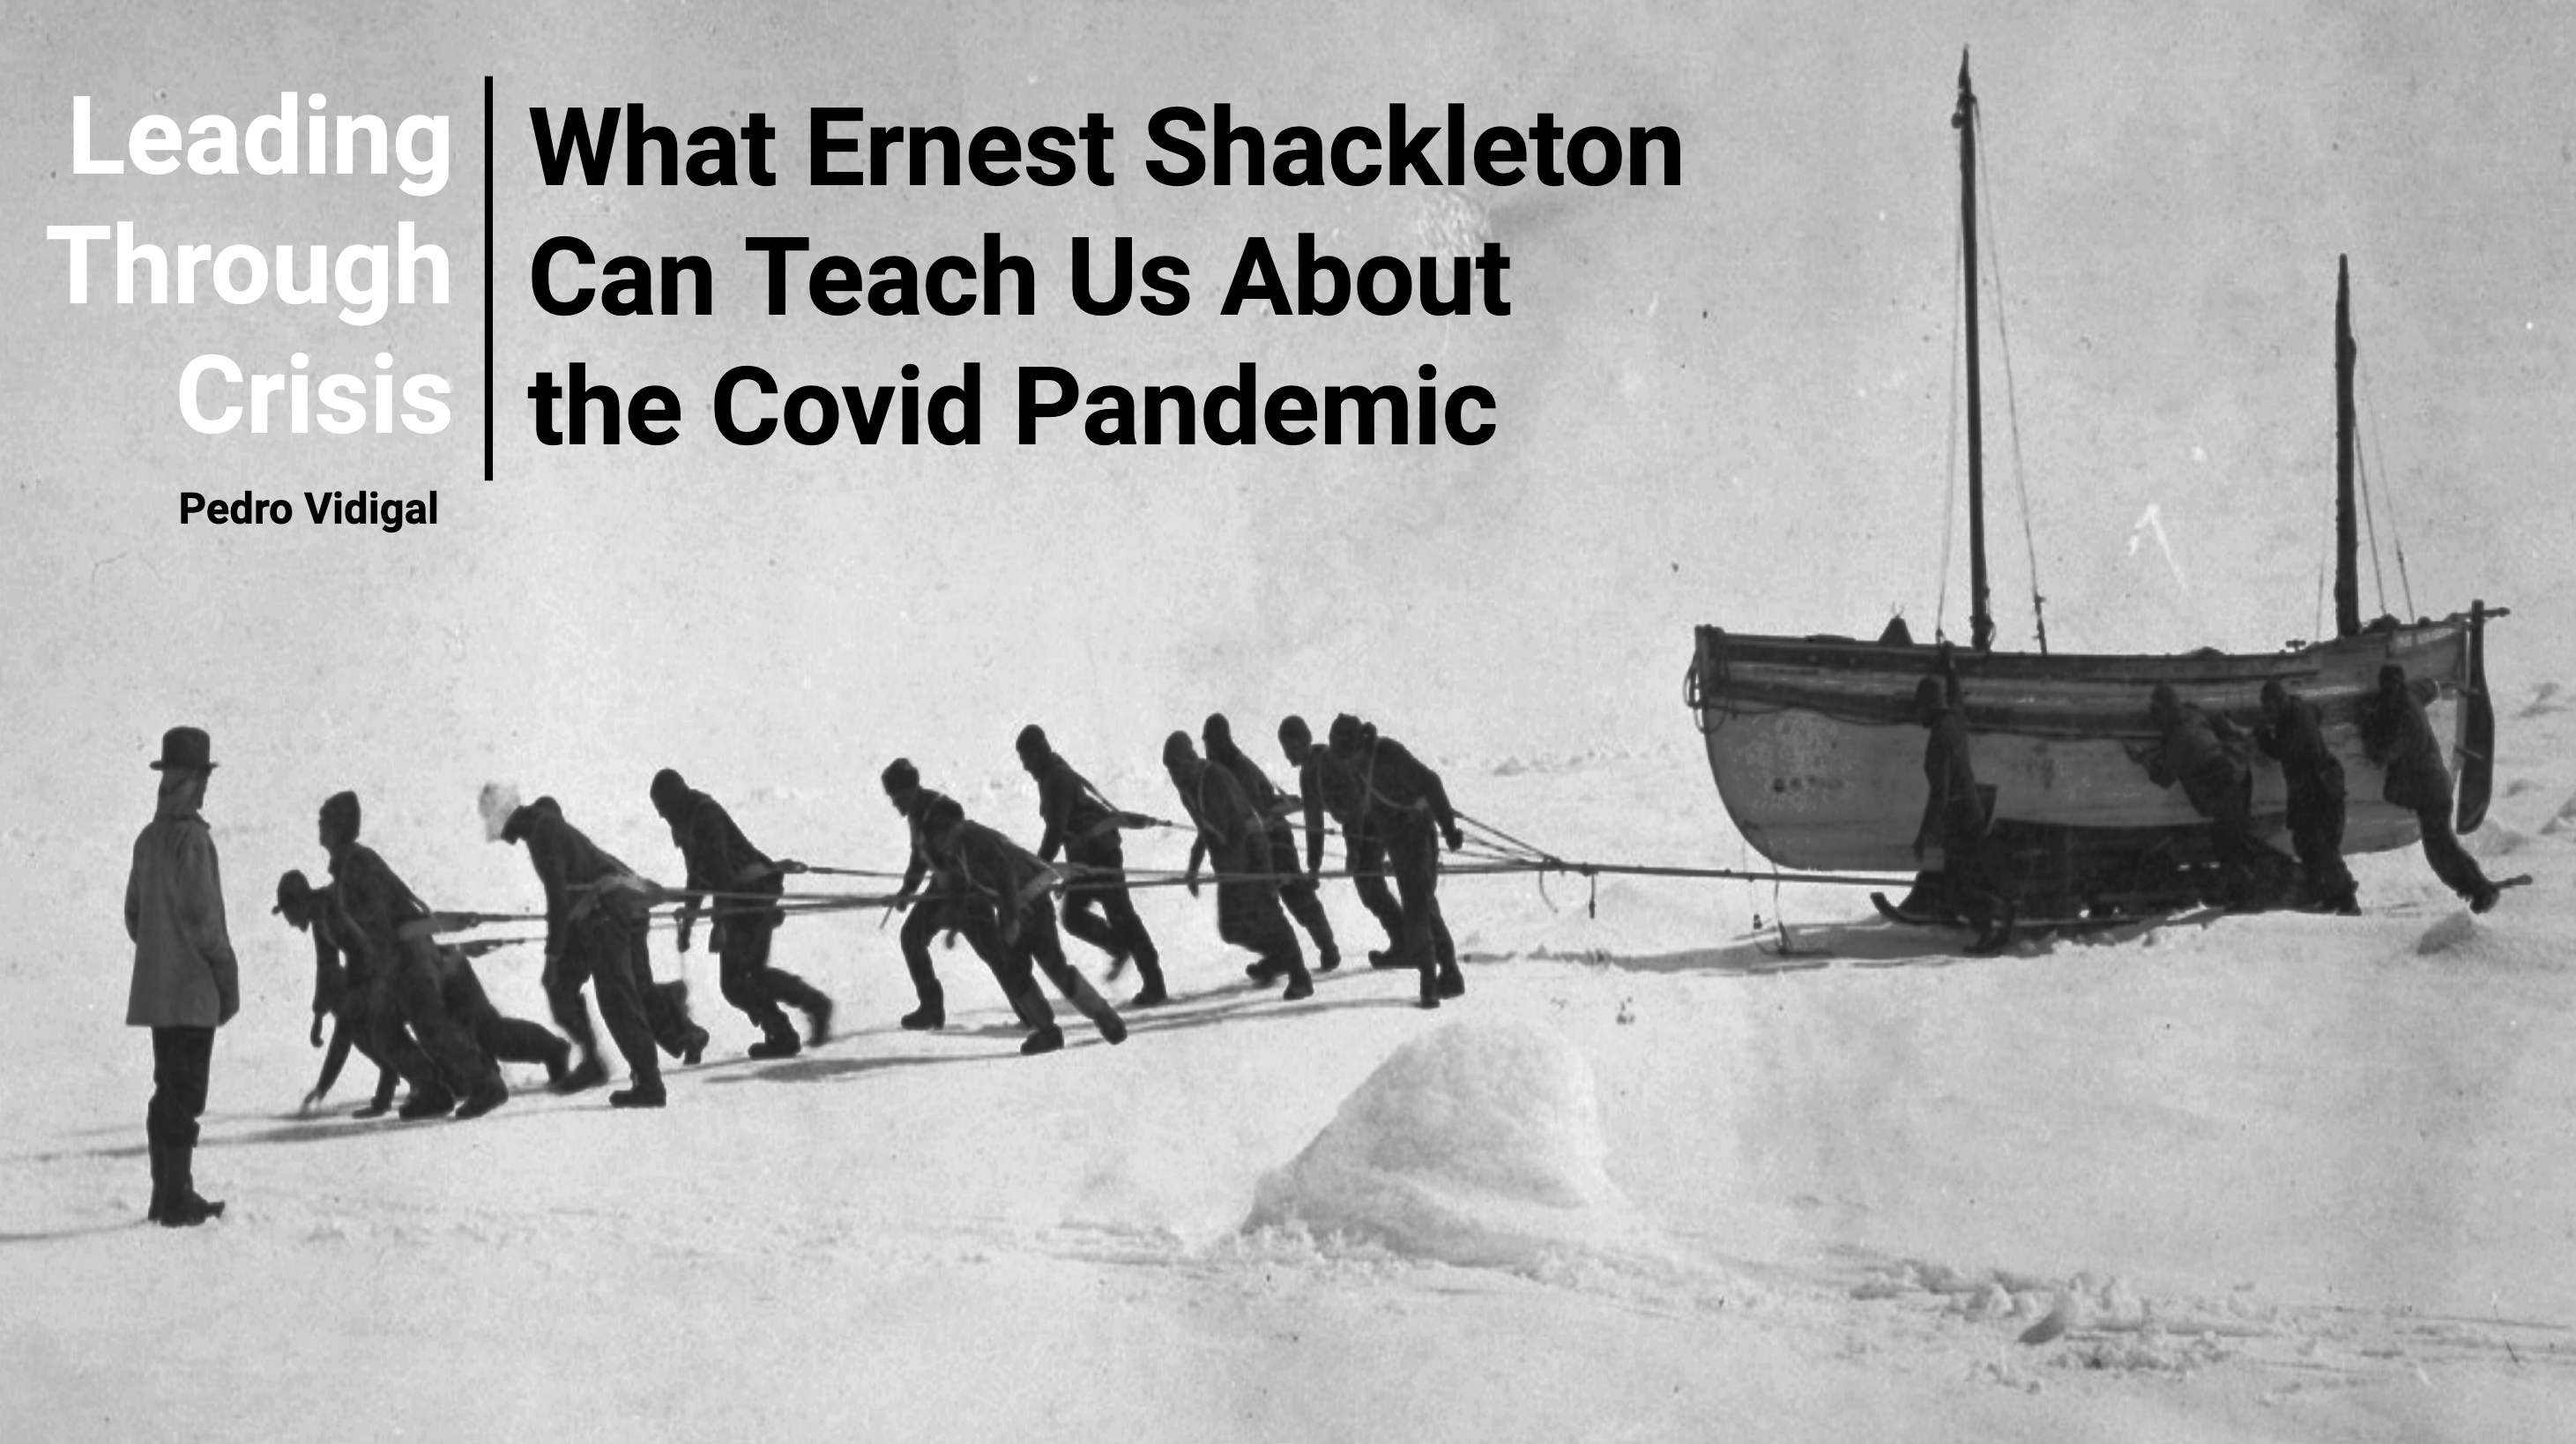 Leading Through Chrisis | What Ernest Shackleton Can Teach Us About the Covid Pandemic.